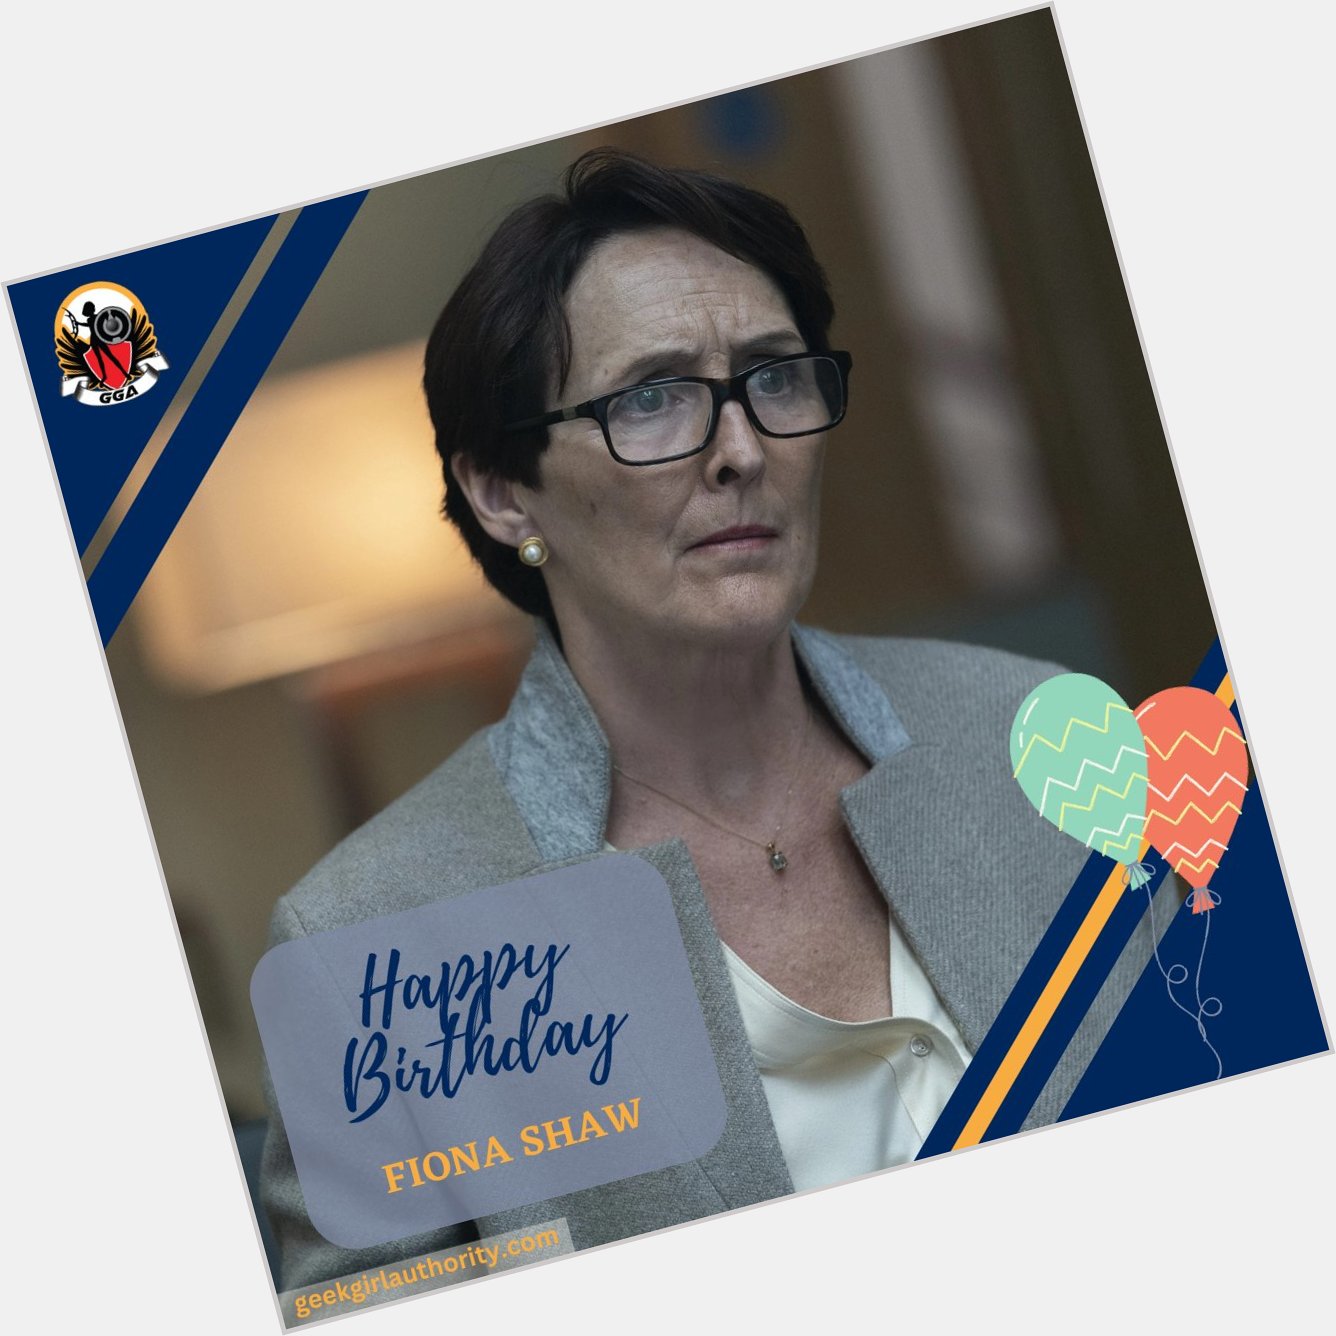 Happy Birthday, Fiona Shaw! Which one of her roles is your favorite?   